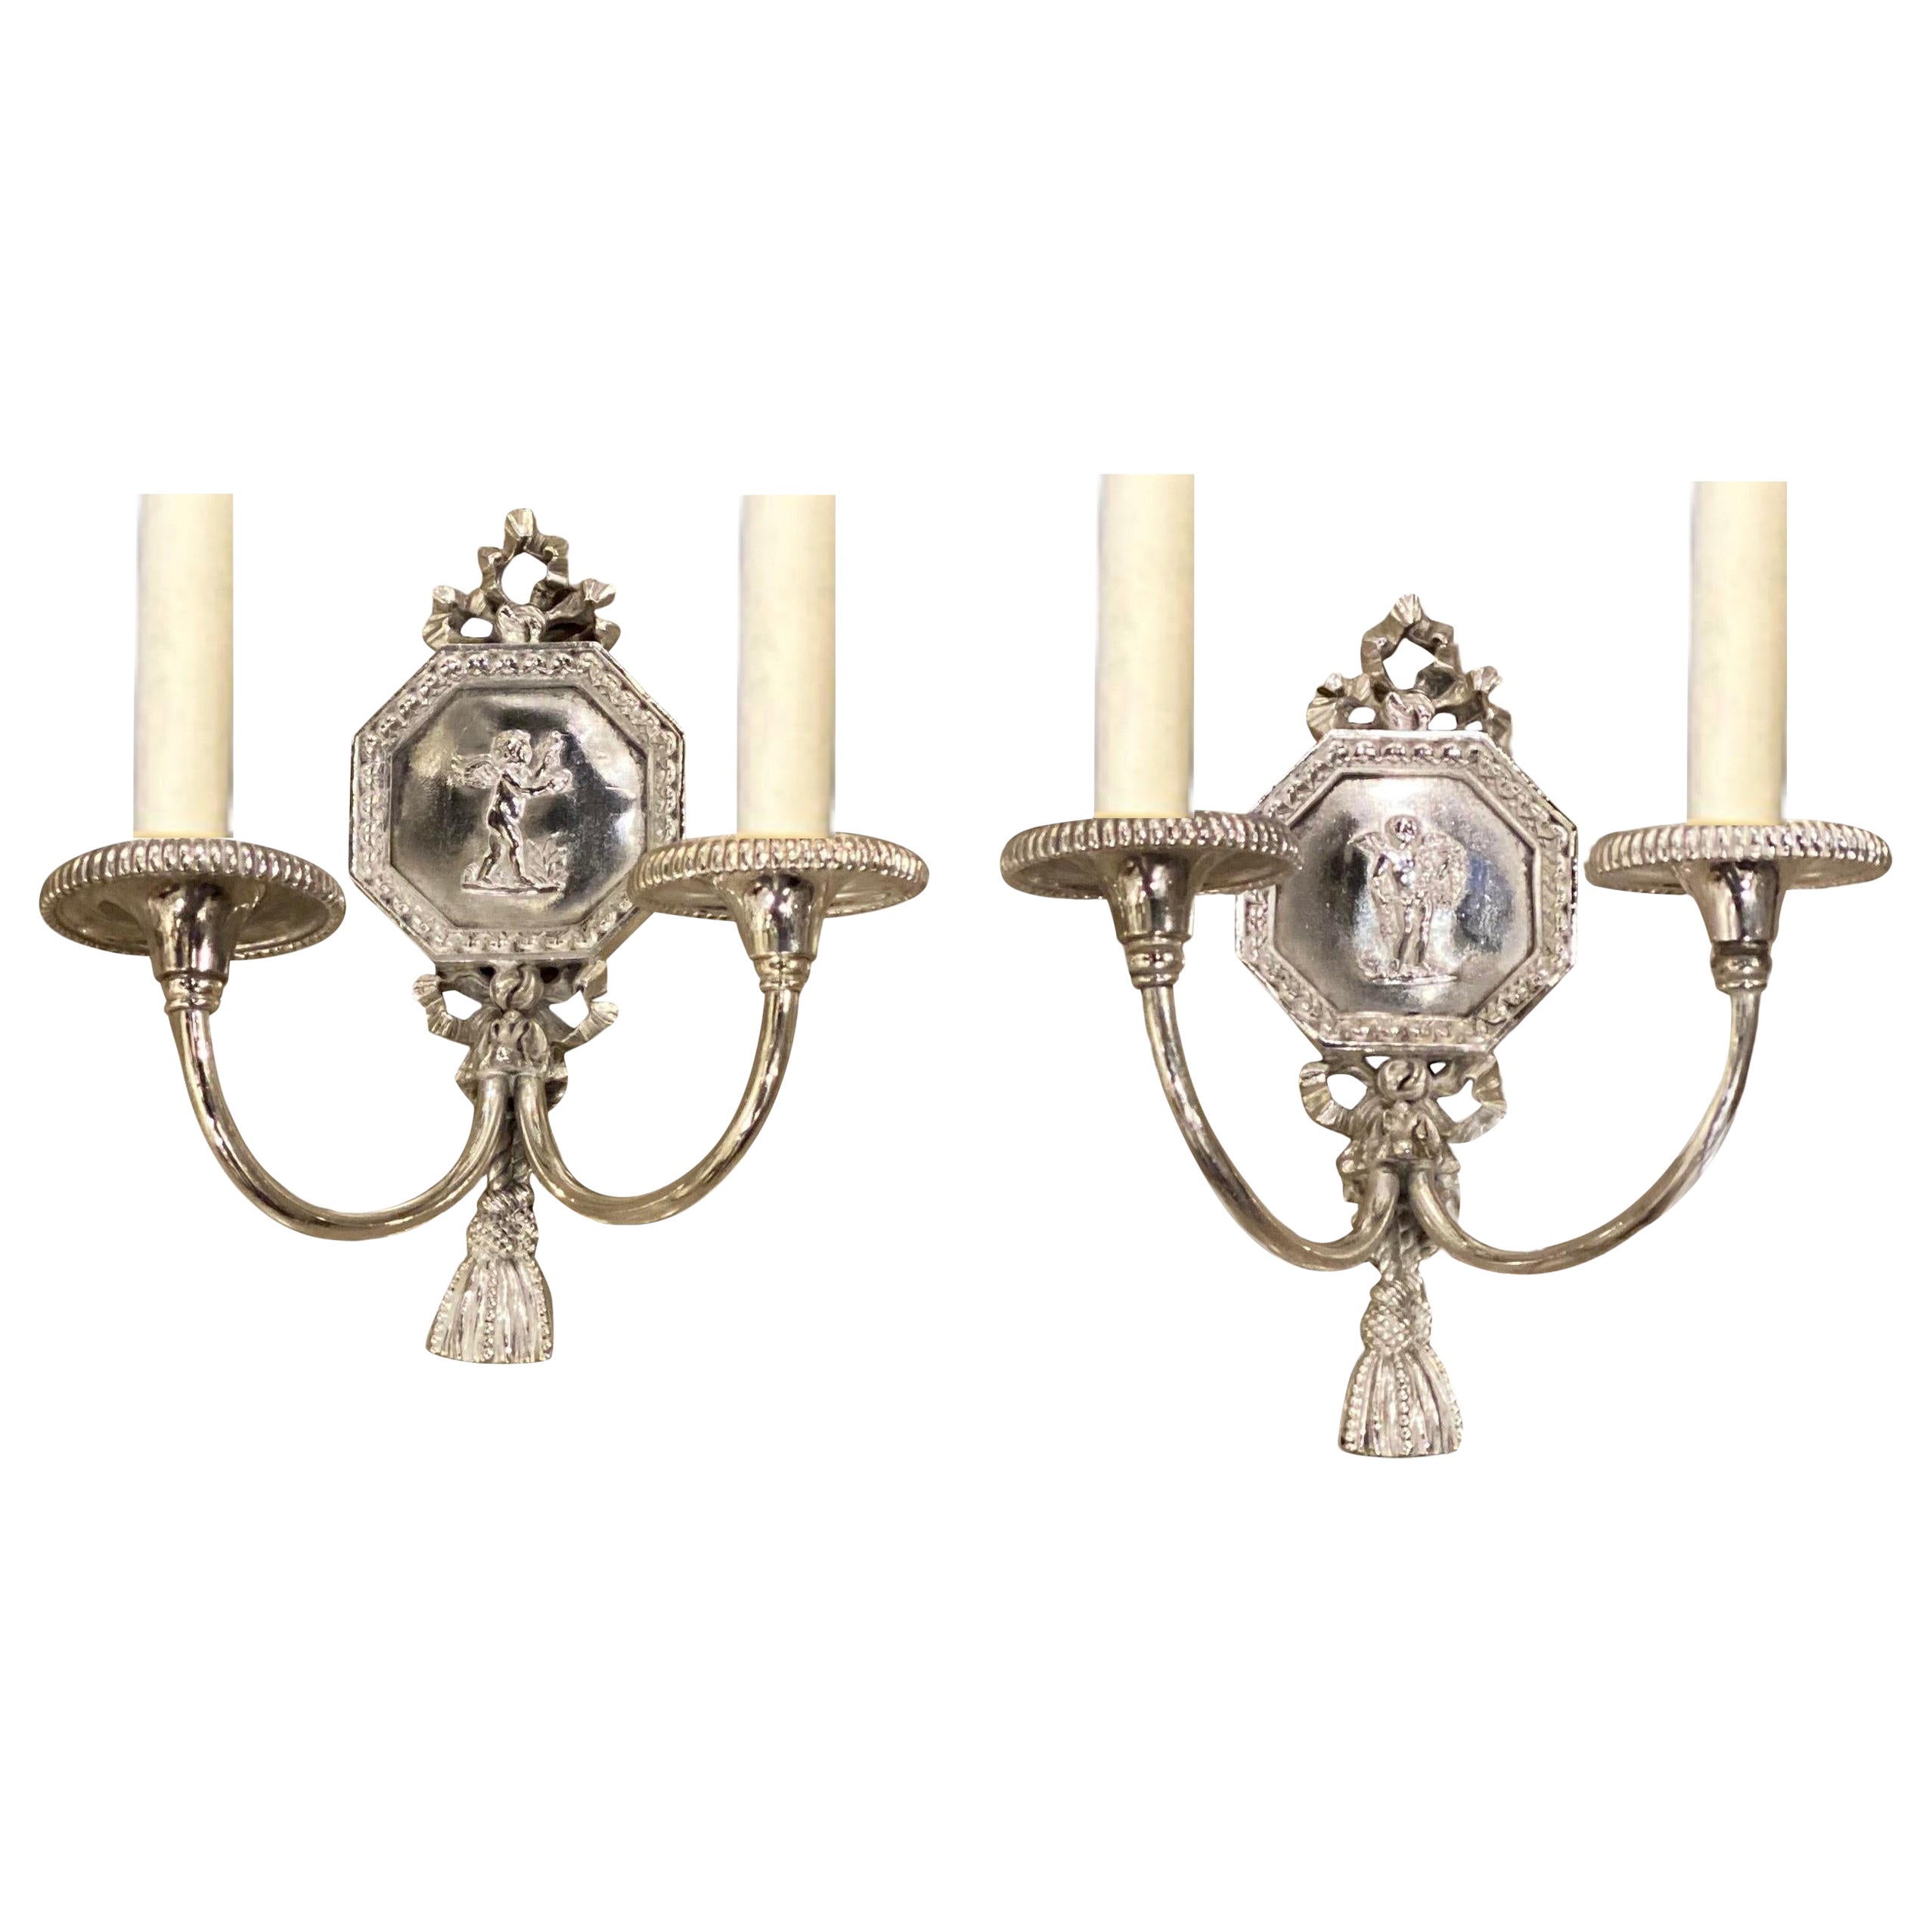 1920s Silver Plated Small Sconces With Cherubs For Sale